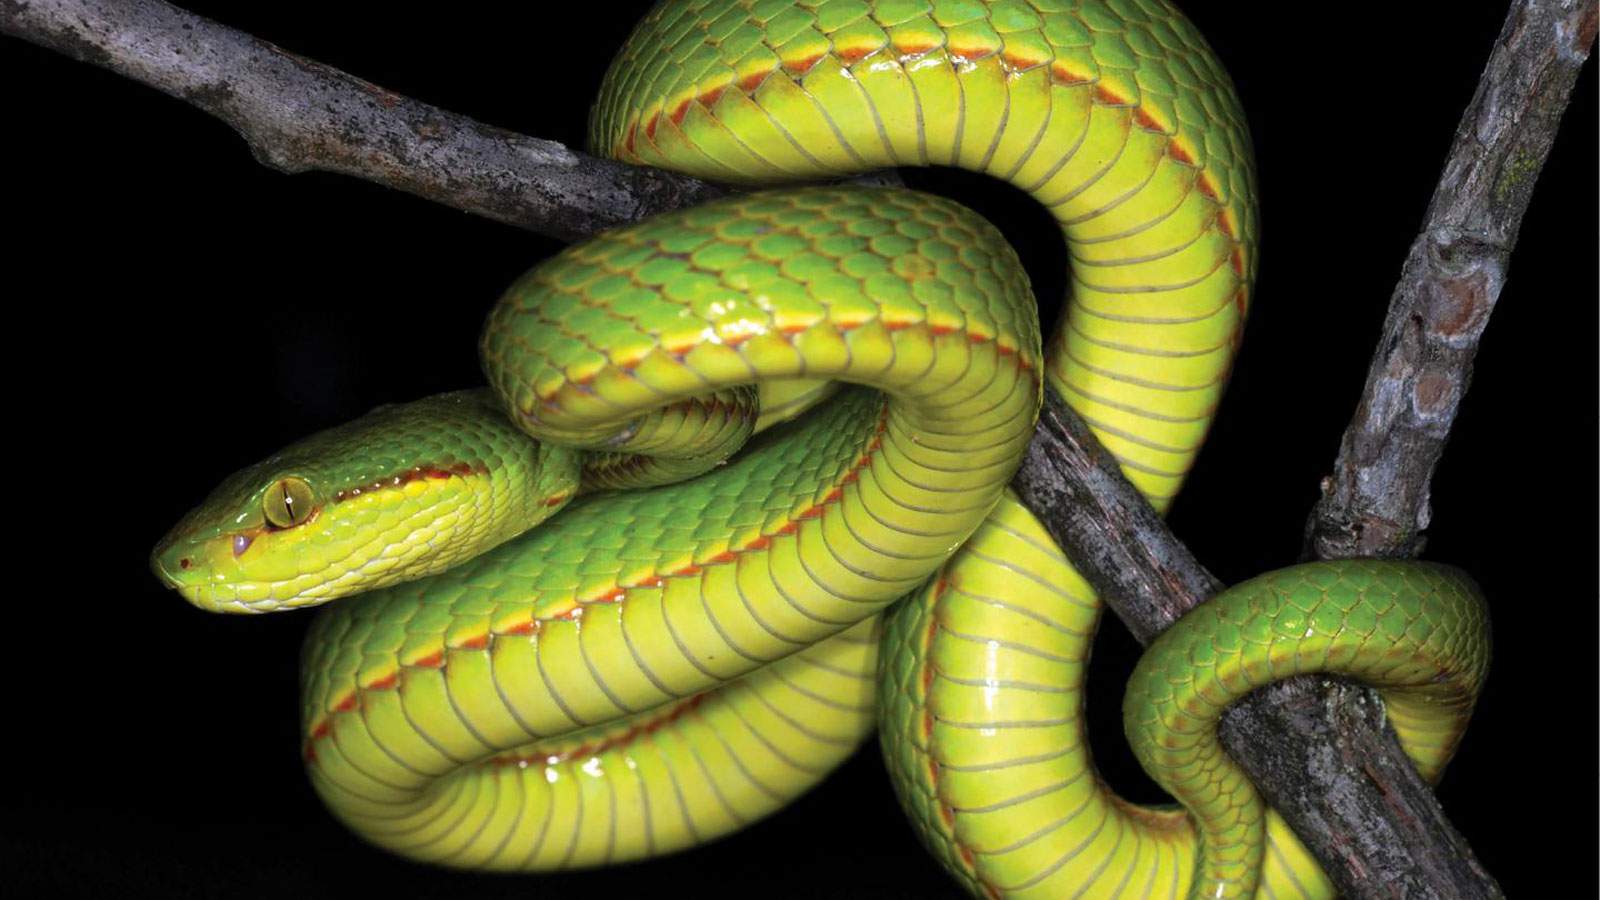 Scientists discover a new snake and name it after Salazar Slytherin